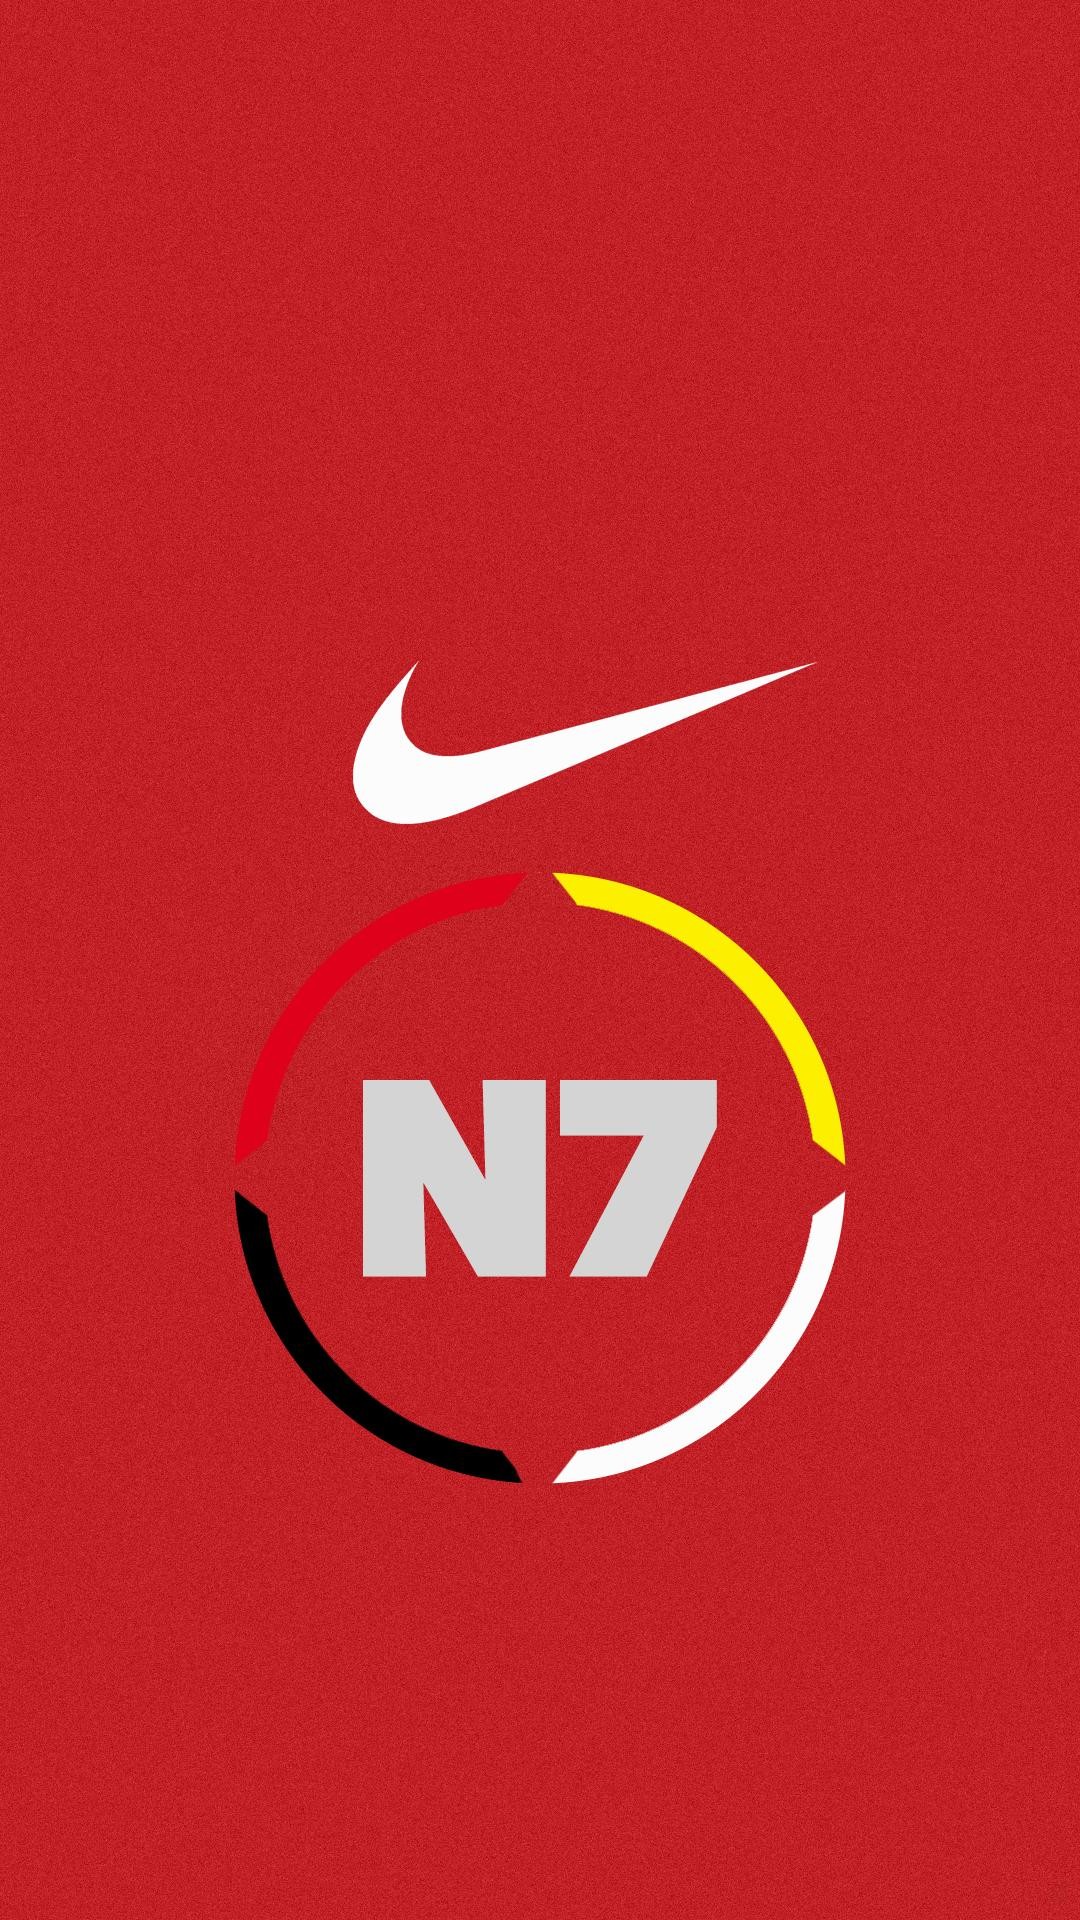 Wallpaper.wiki Download Free Nike Image for Iphone